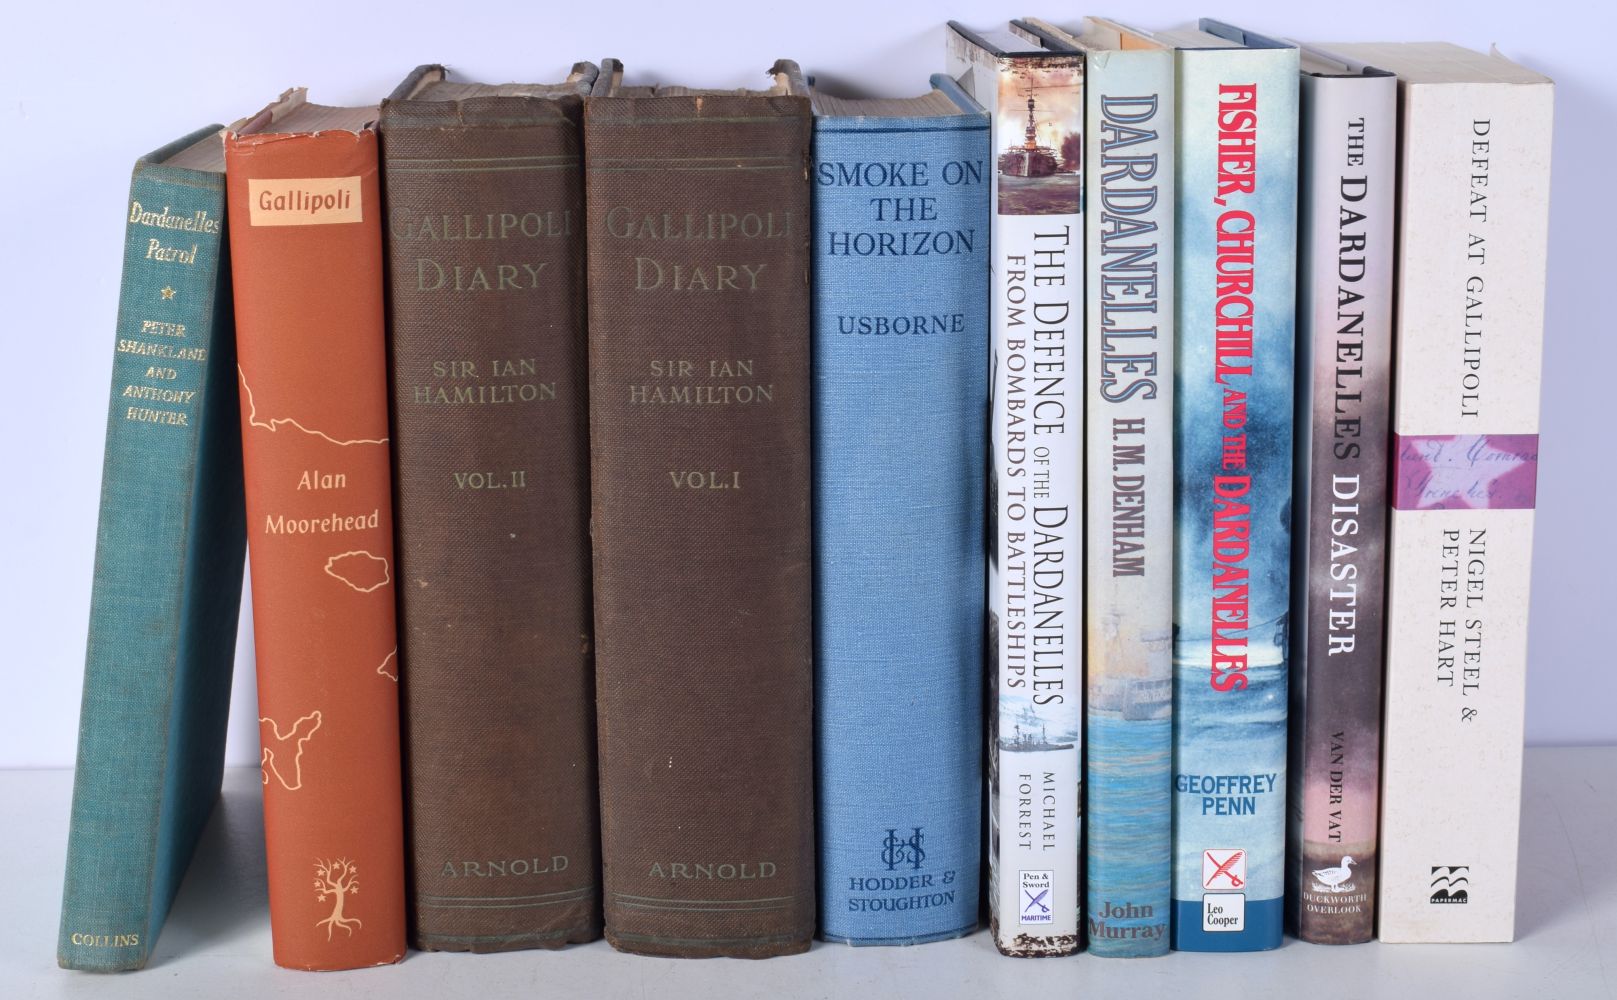 A collection of books related to Gallipoli & Dardanelles (10)